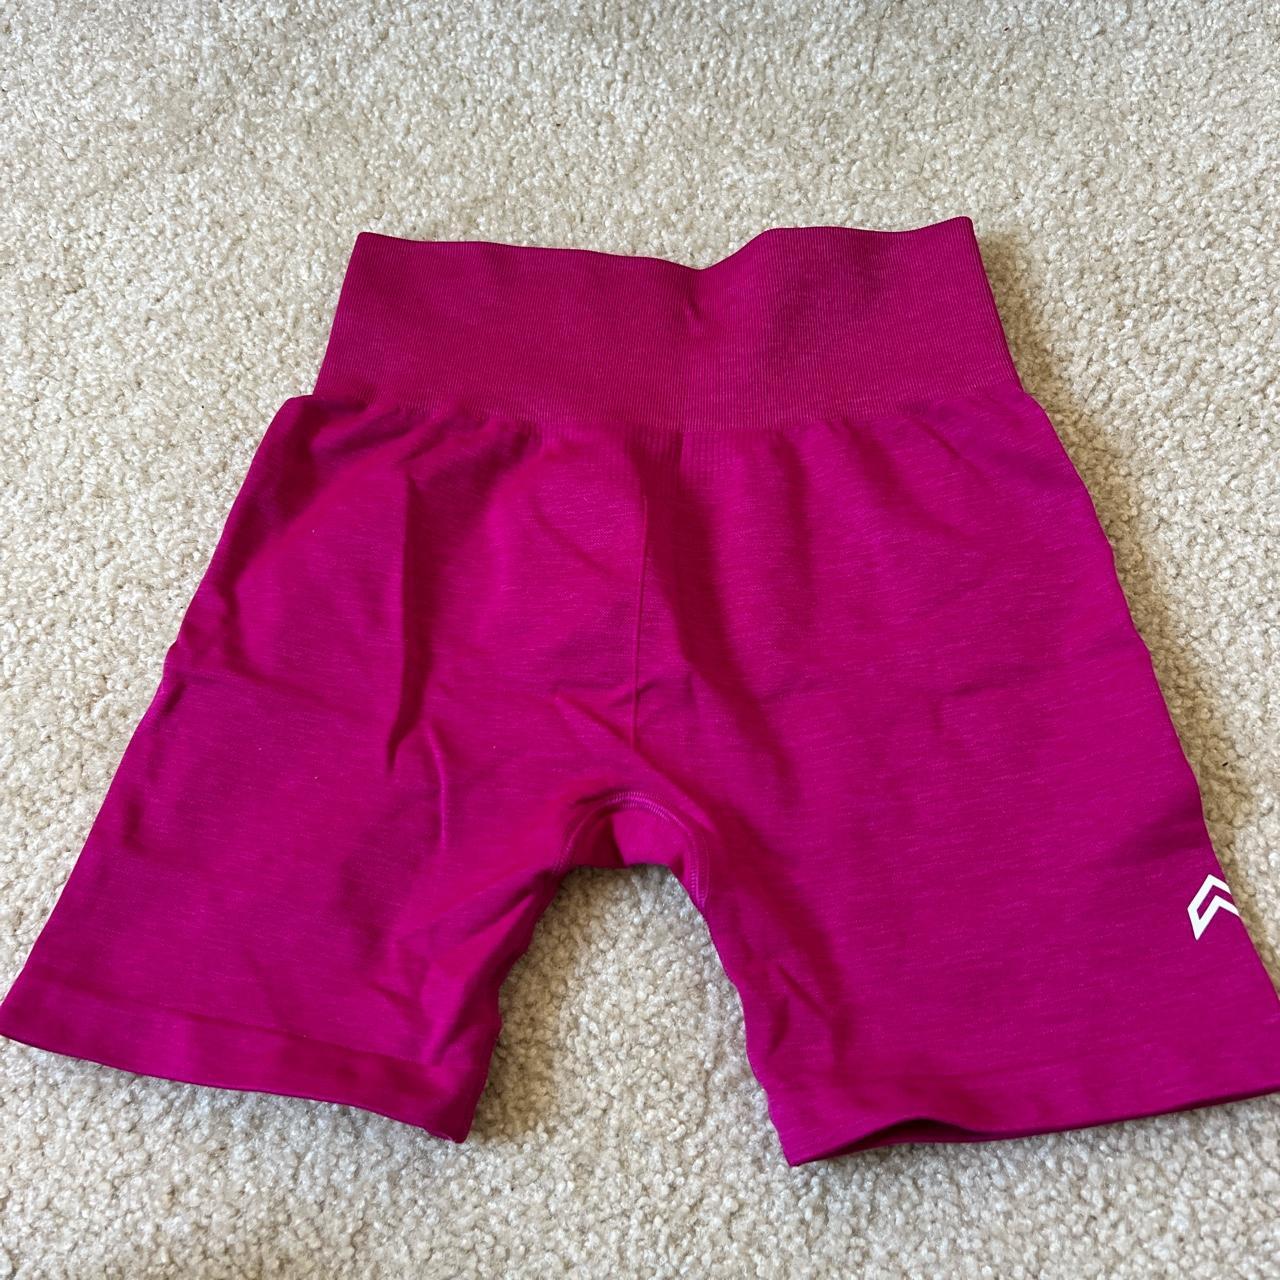 Product Image 2 - Oner active classic seamless pink